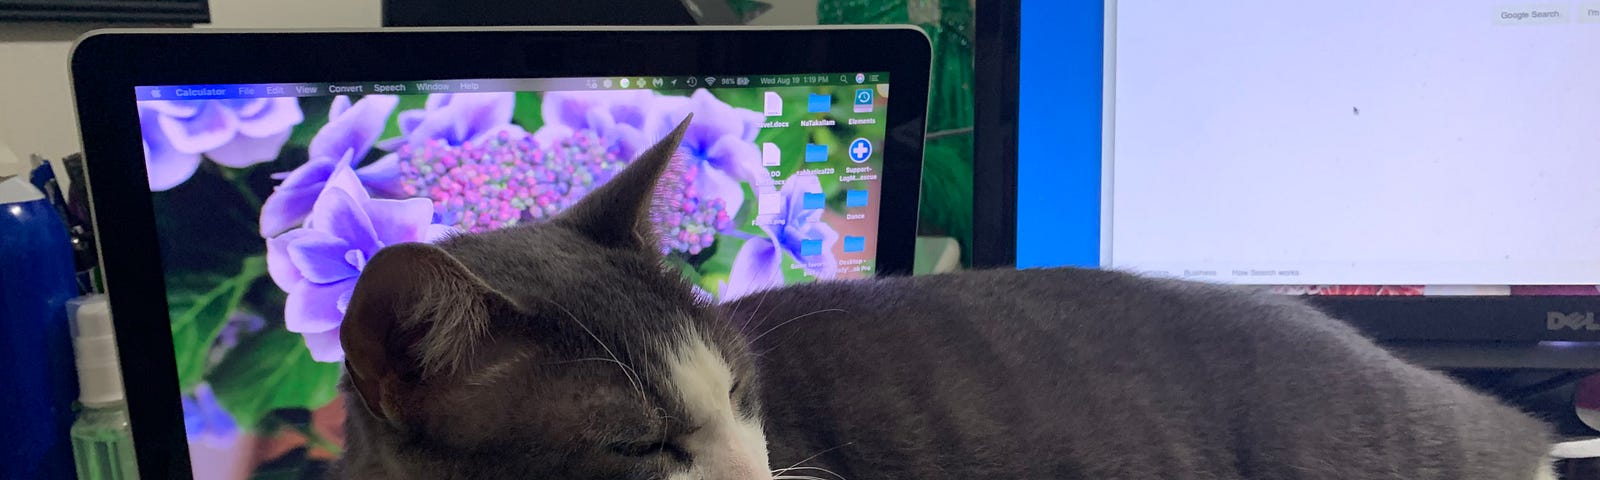 My cat Gandalf sleeping in front of my computer monitor